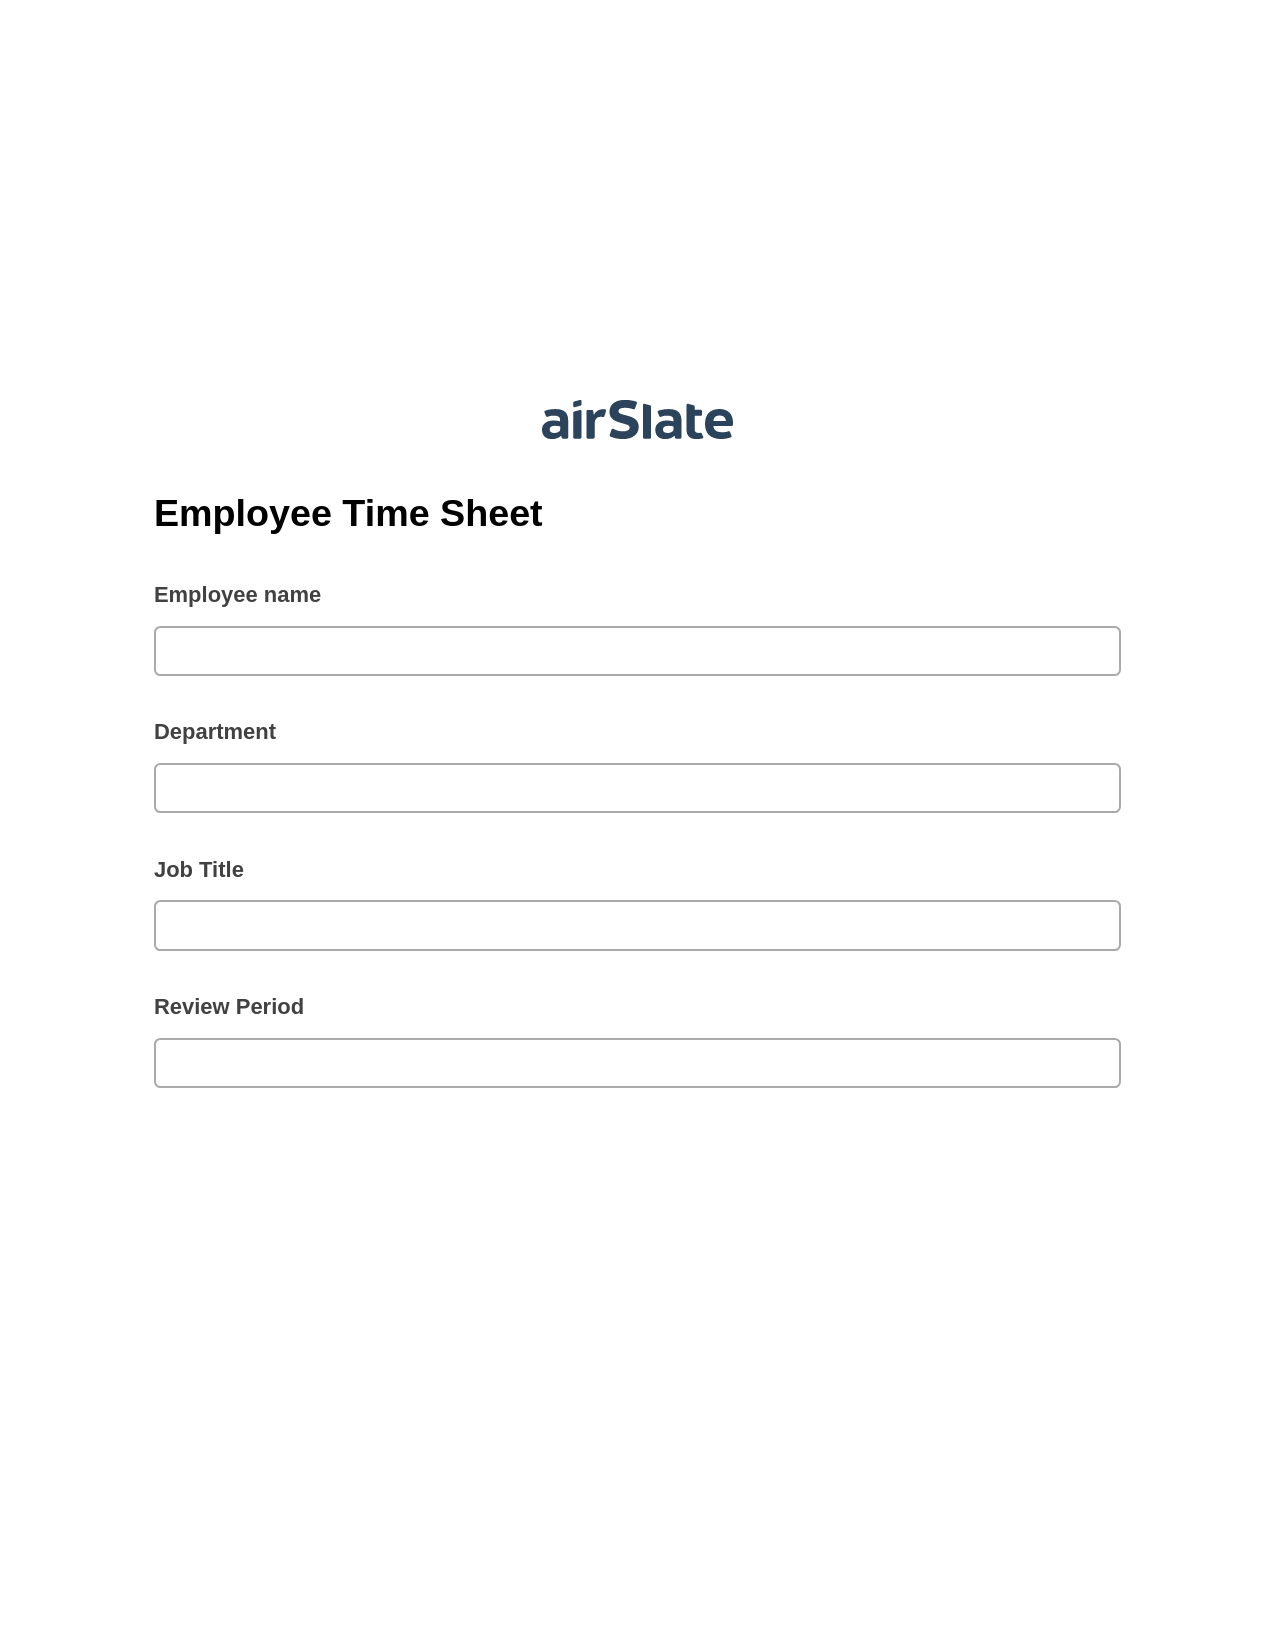 Employee Time Sheet Pre-fill Document Bot, Update Audit Trail Bot, Export to Smartsheet